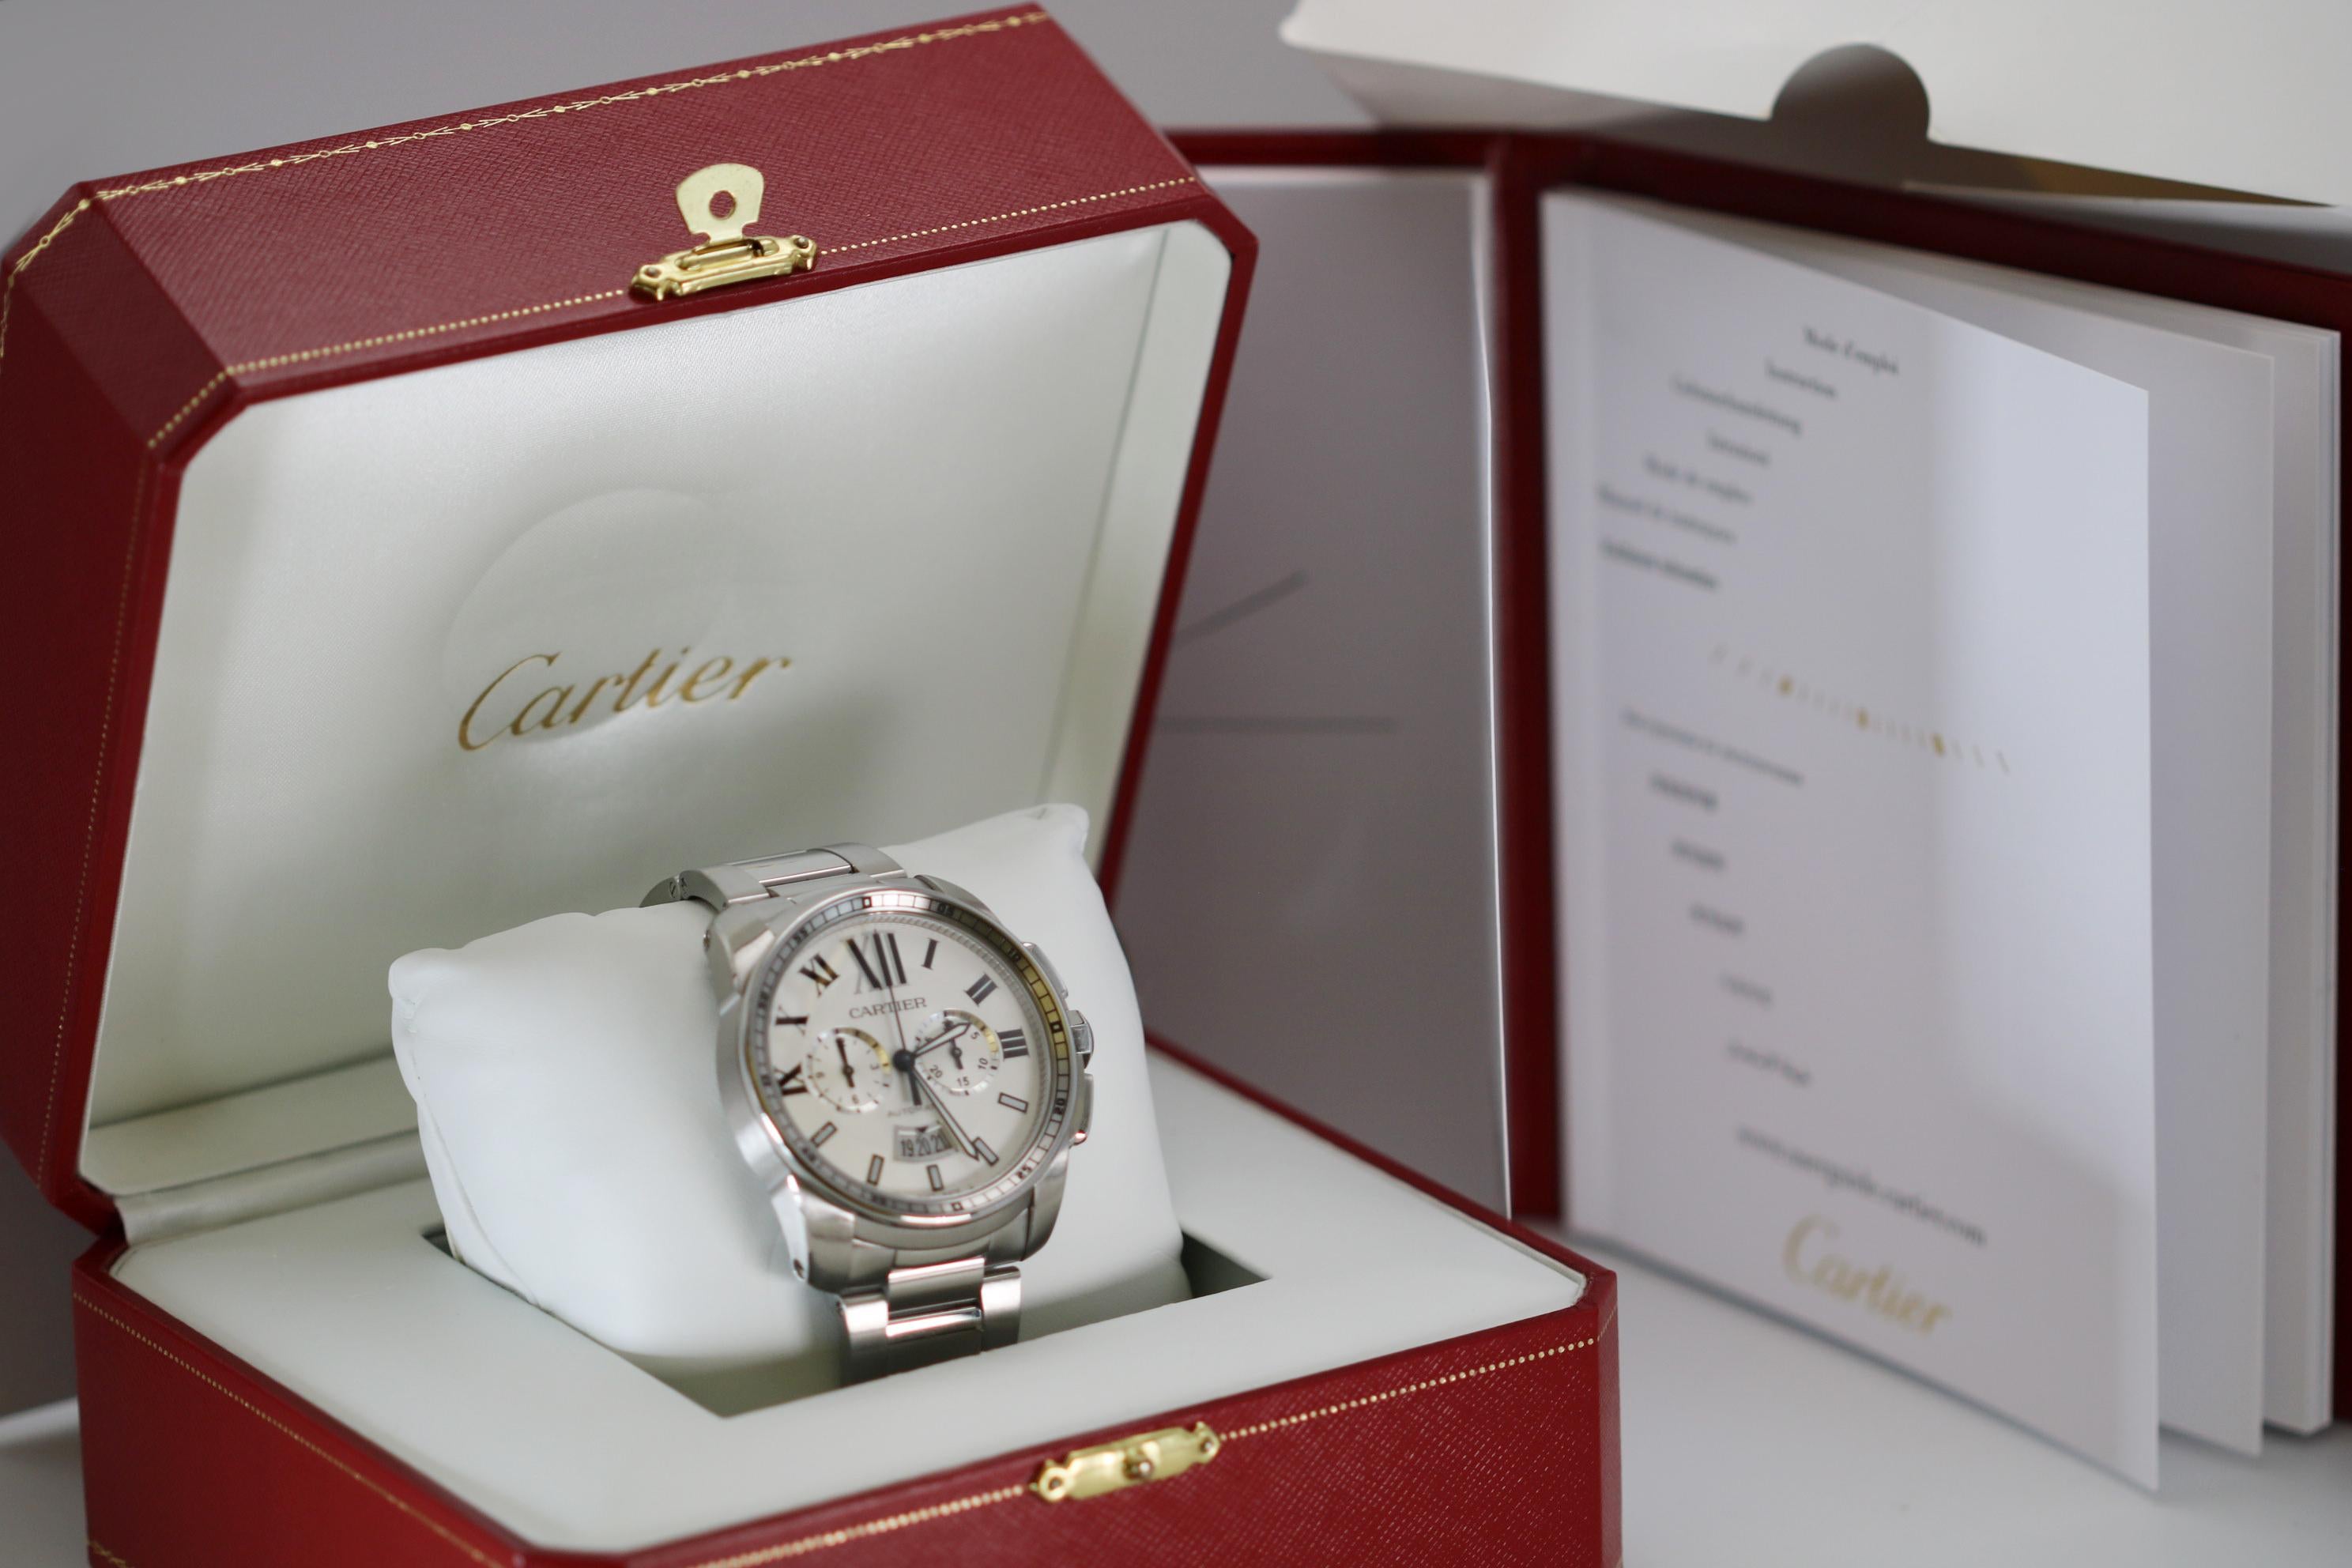 Cartier Stainless Steel Calibre de Cartier Chronograph Ref W7100045 circa 2010
Movement: Automatic caliber 1904/CH MC, 35-Jewel
Dial: Silver with silver tracking & registers
Comes with: box and papers
Size: 42mm
Circa: 2010s




